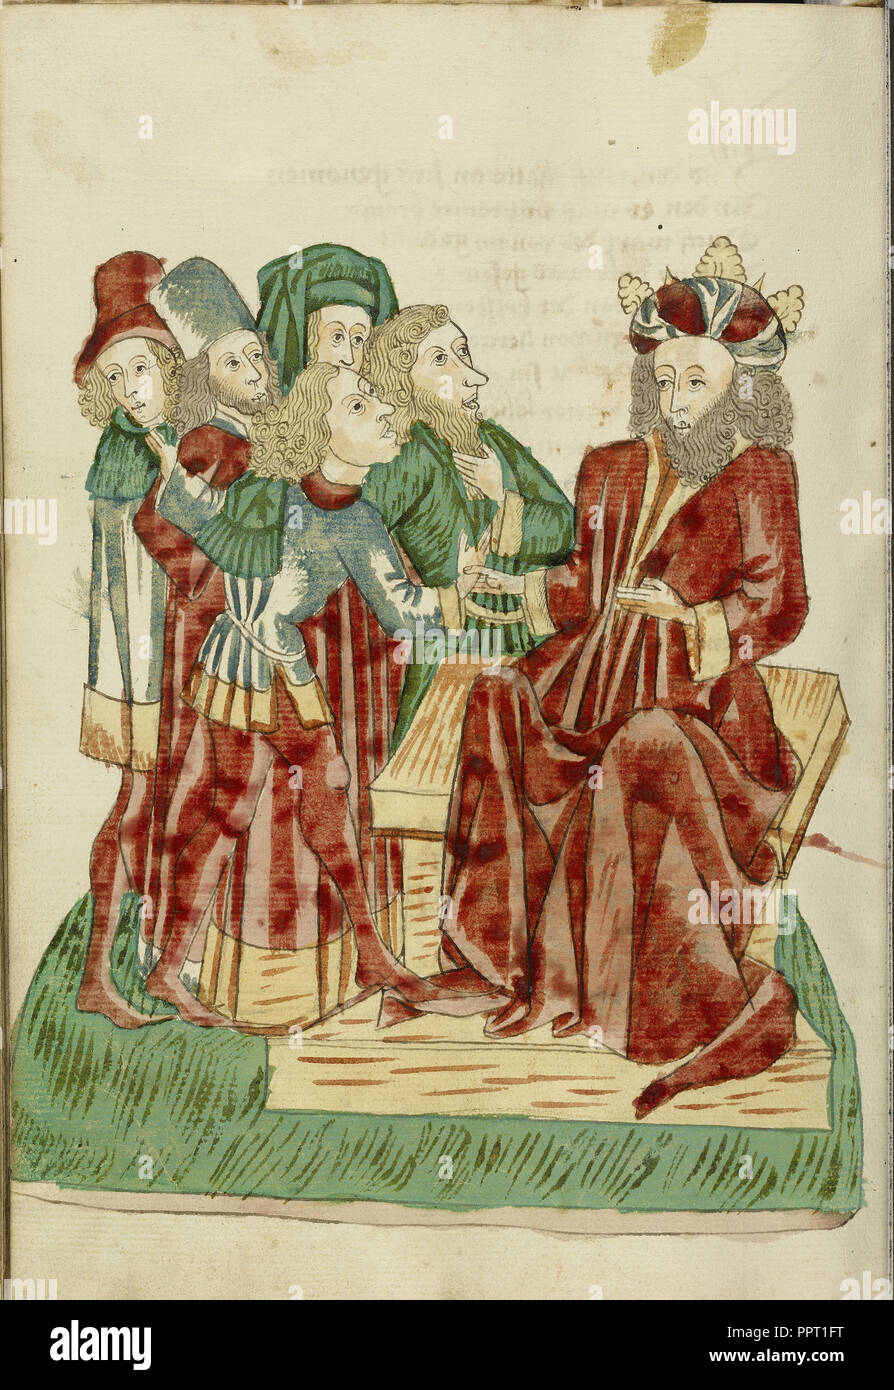 King Avenir Converses with his Courtiers; Follower of Hans Schilling, German, active 1459 - 1467, from the Workshop of Diebold Stock Photo